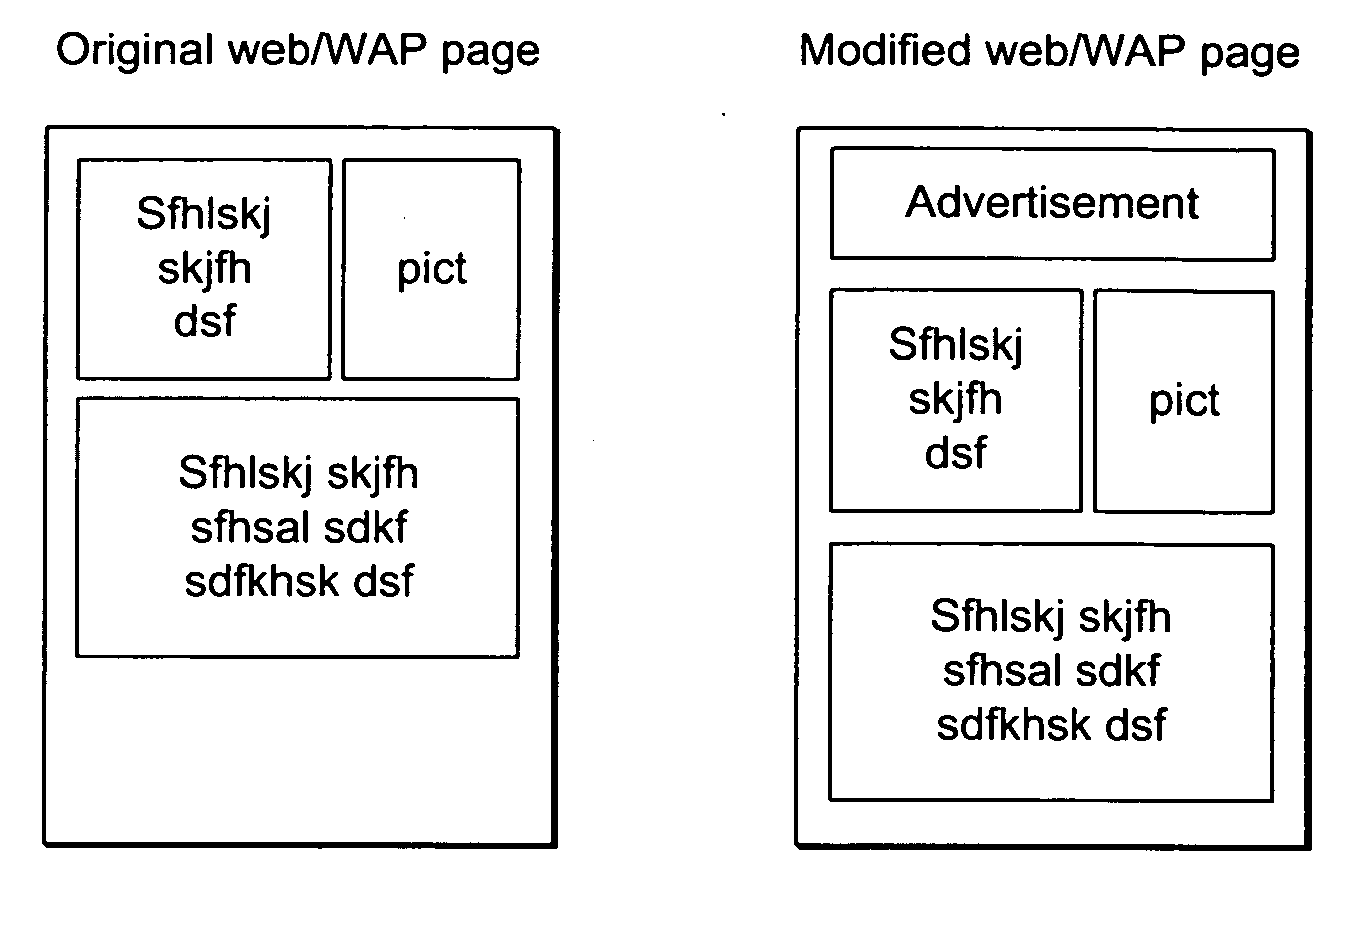 System, method and computer program for assocating advertisements with web or wap pages